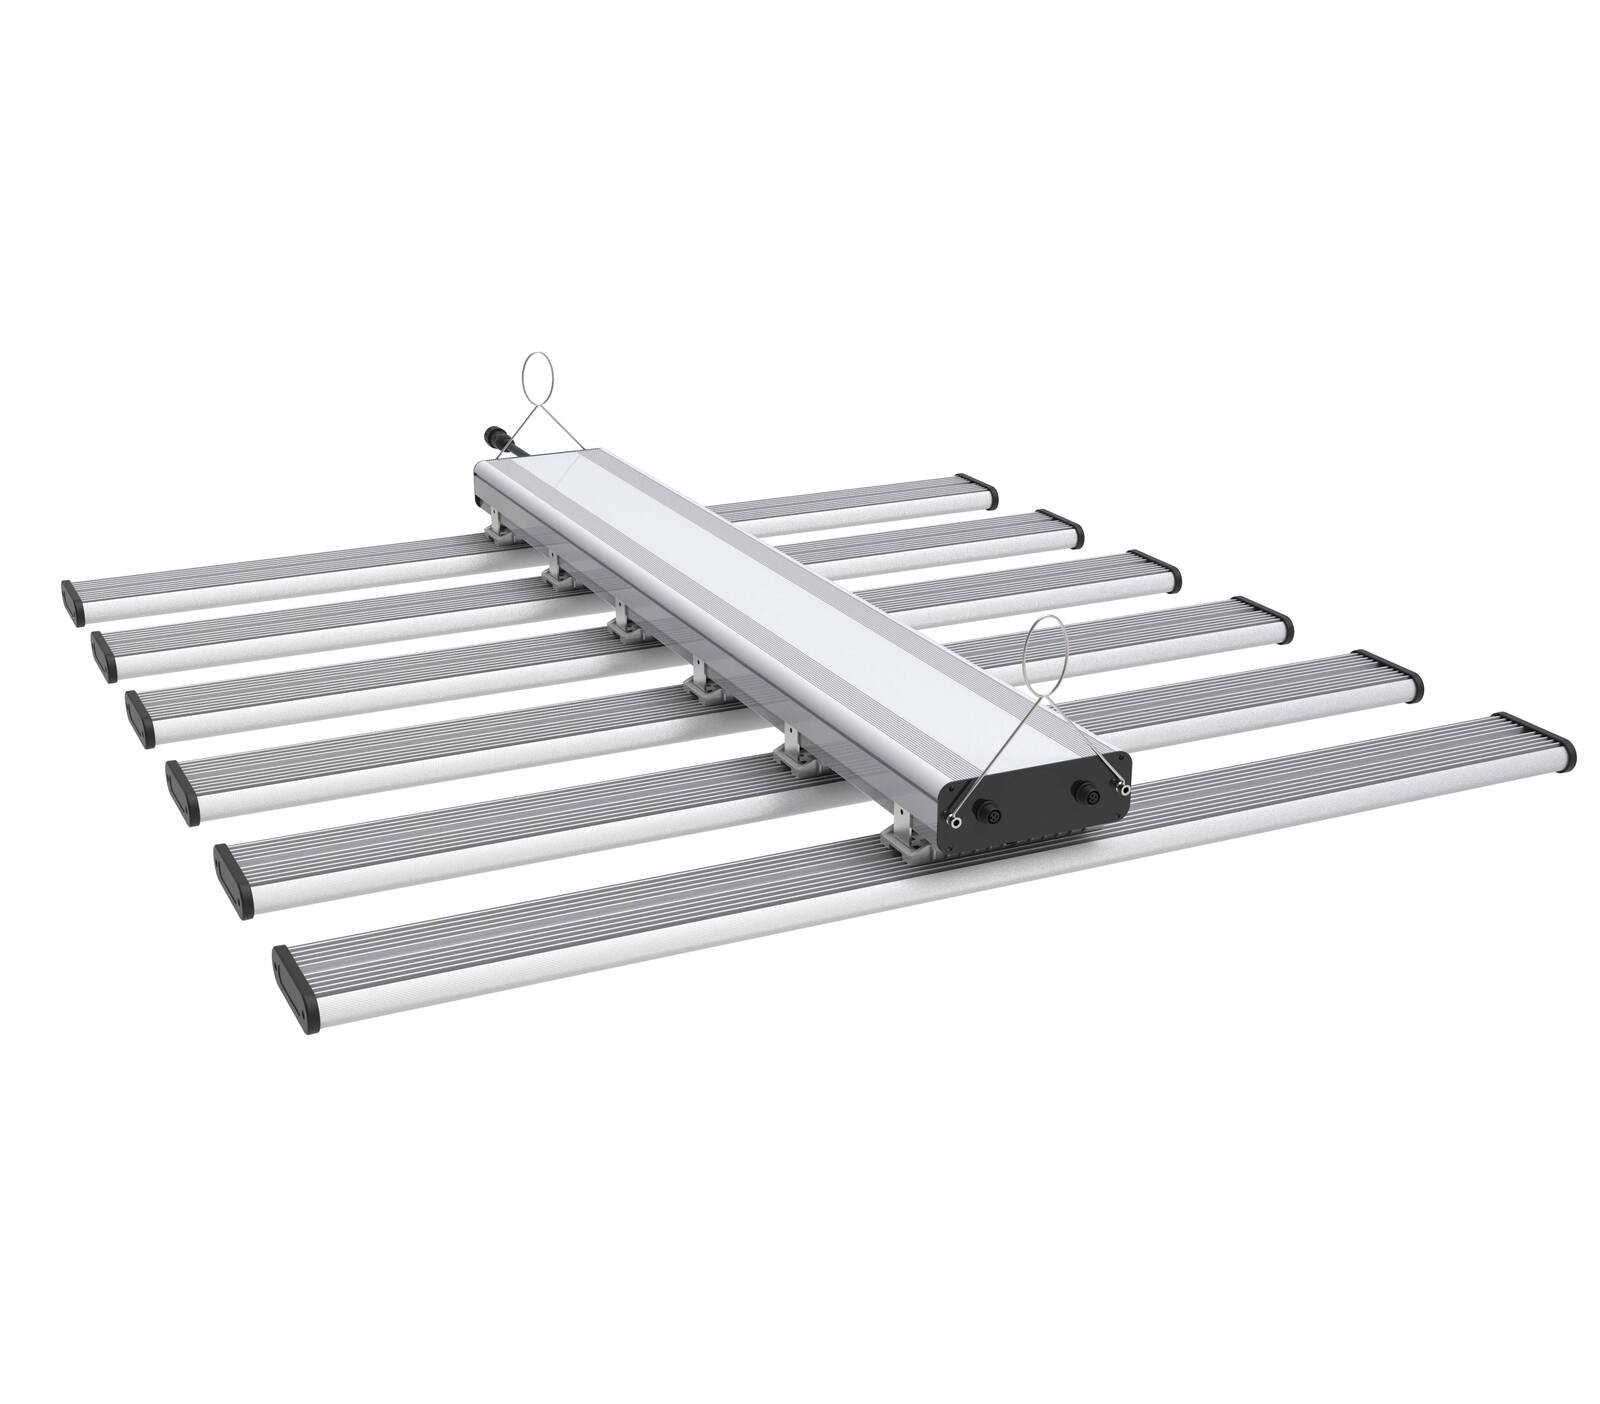 720w Professional LED bar - Latest 2020 spectrum - high output and efficacy - massive results